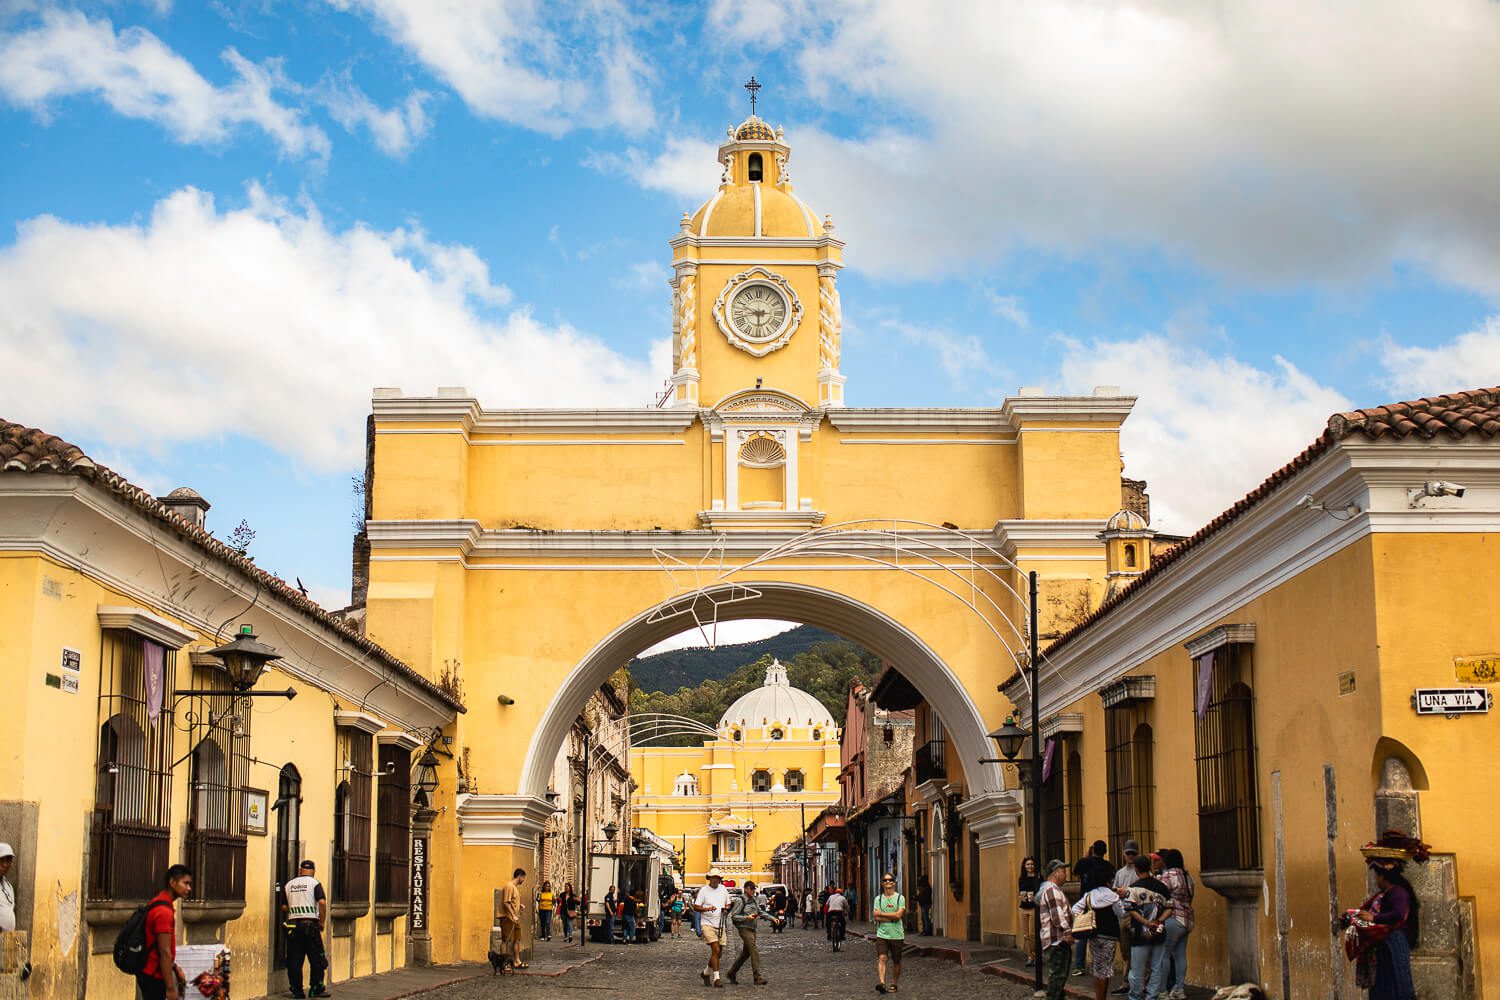 Santa Catalina arch the most popular thing to see in antigua